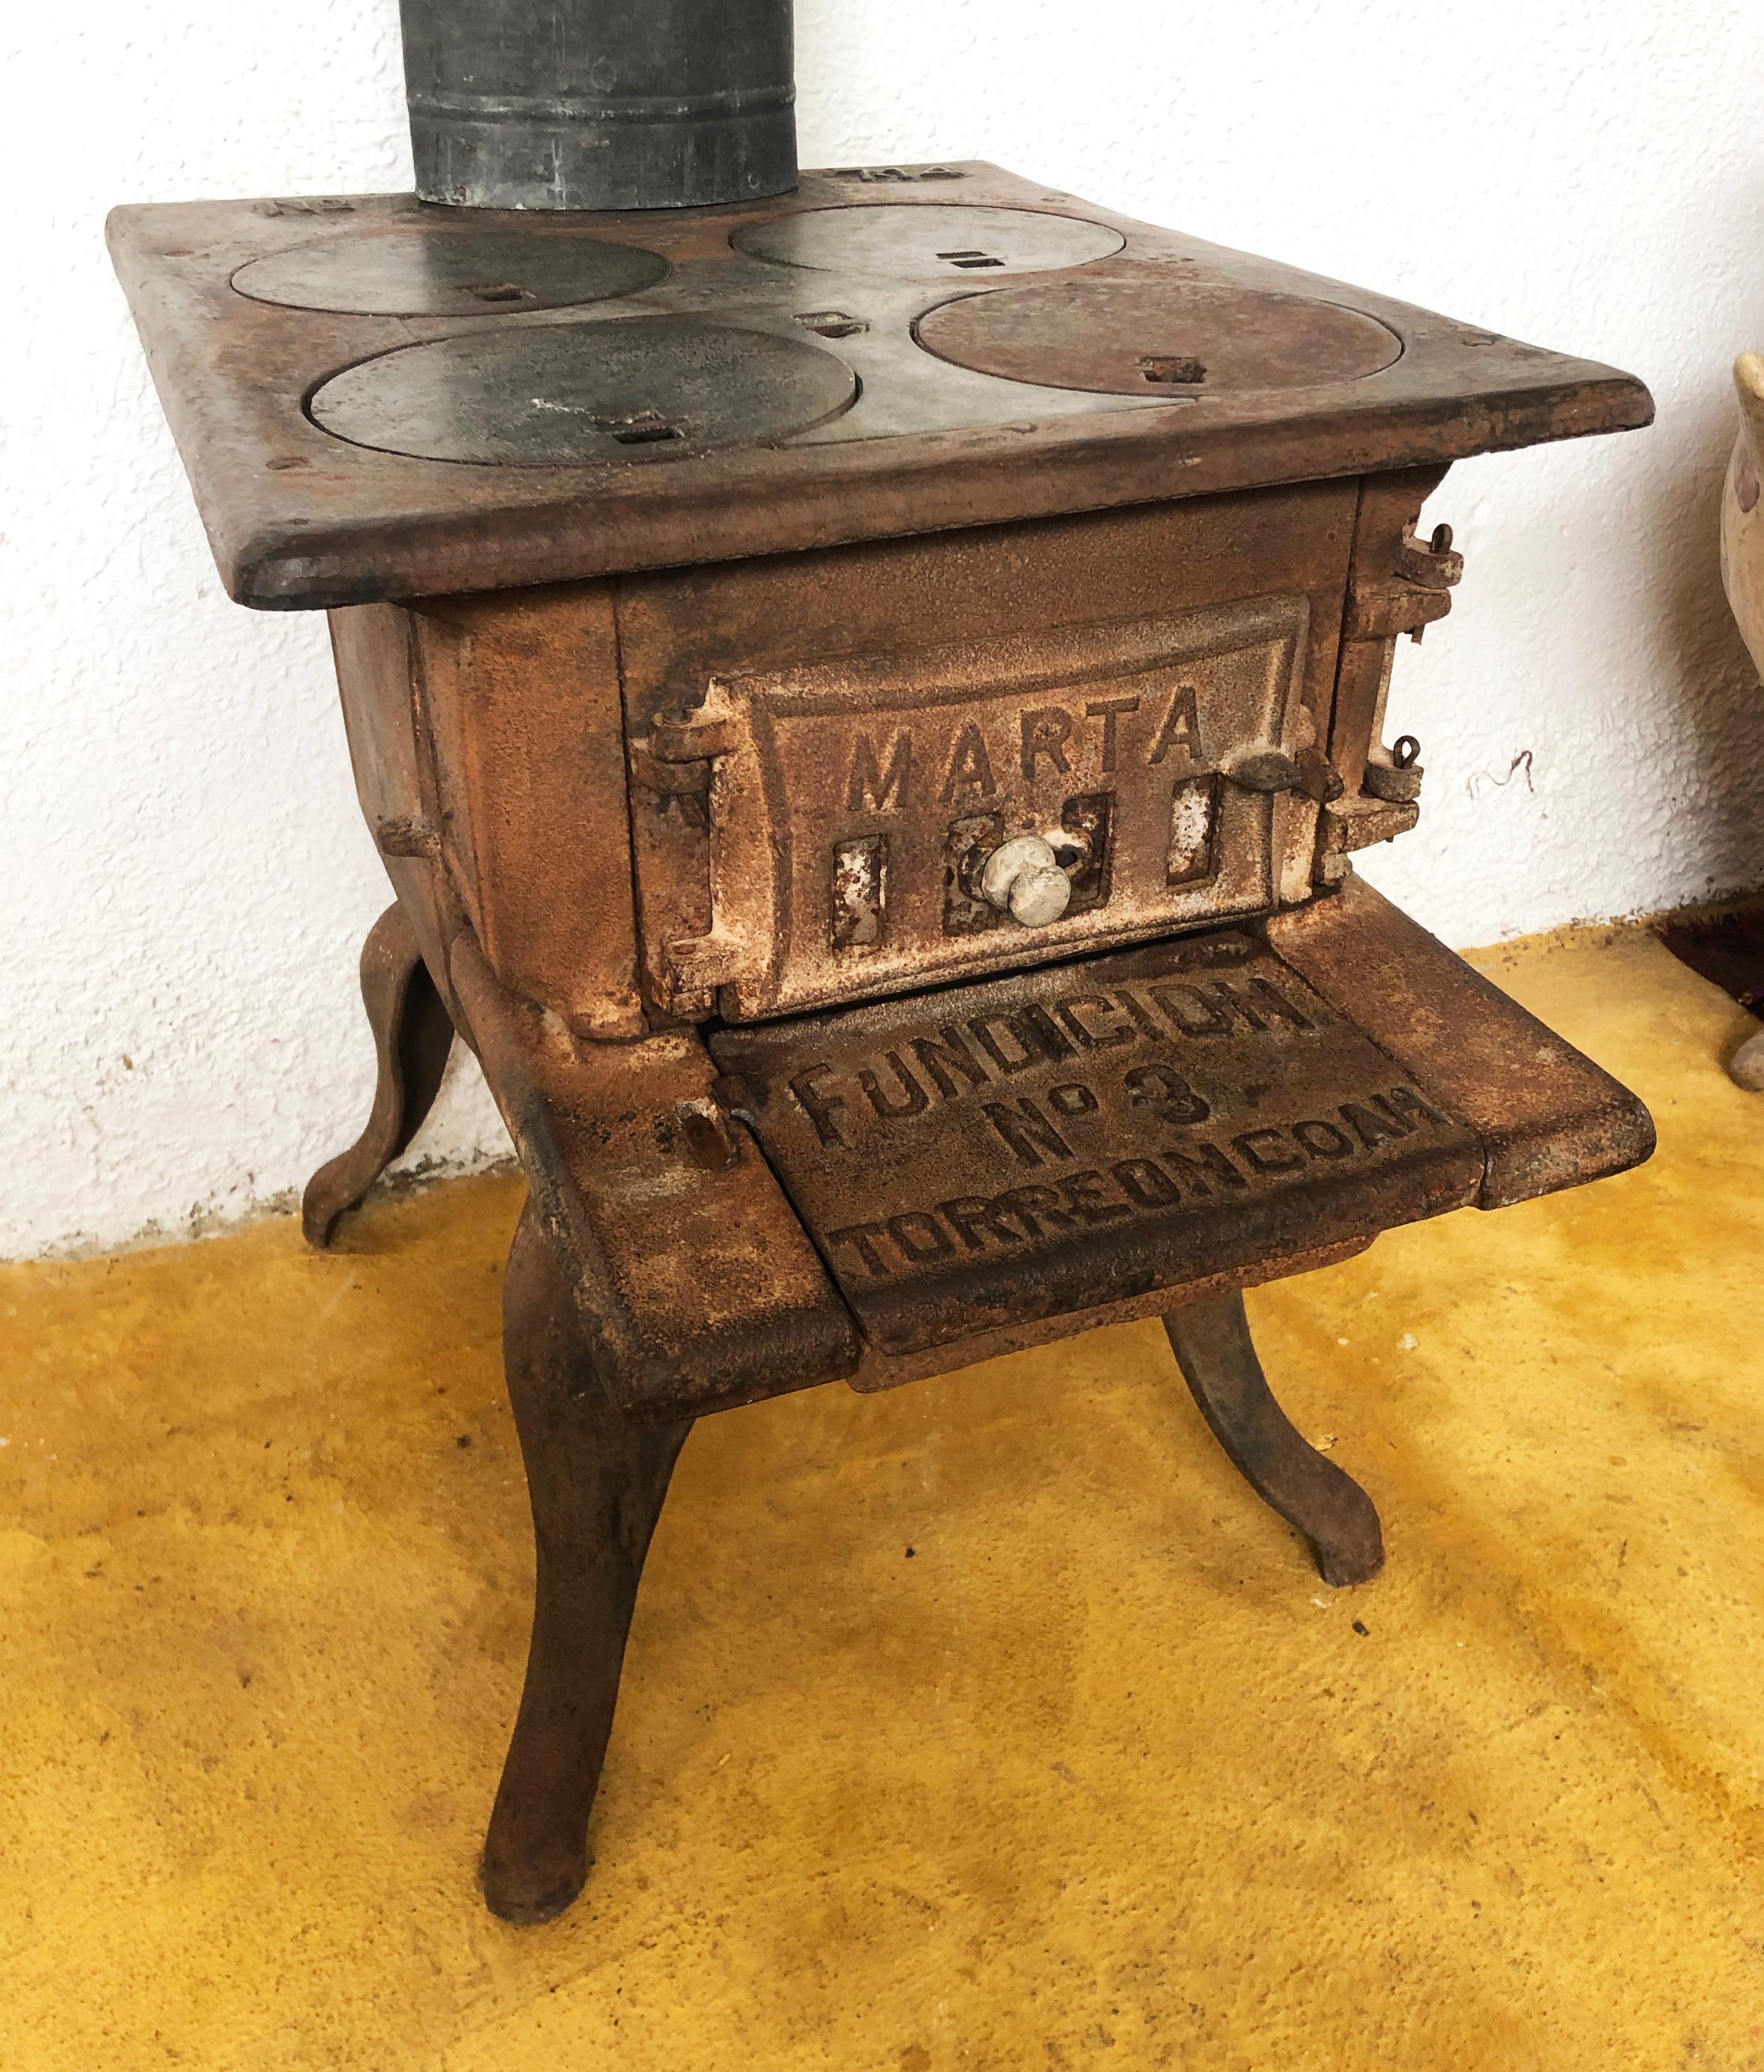 One of the most unique pieces we have found in the last few years is this cast iron French stove with trap doors in many parts of this piece. What a sensational end table this would make next to a chair. The top is flat and the conversations would